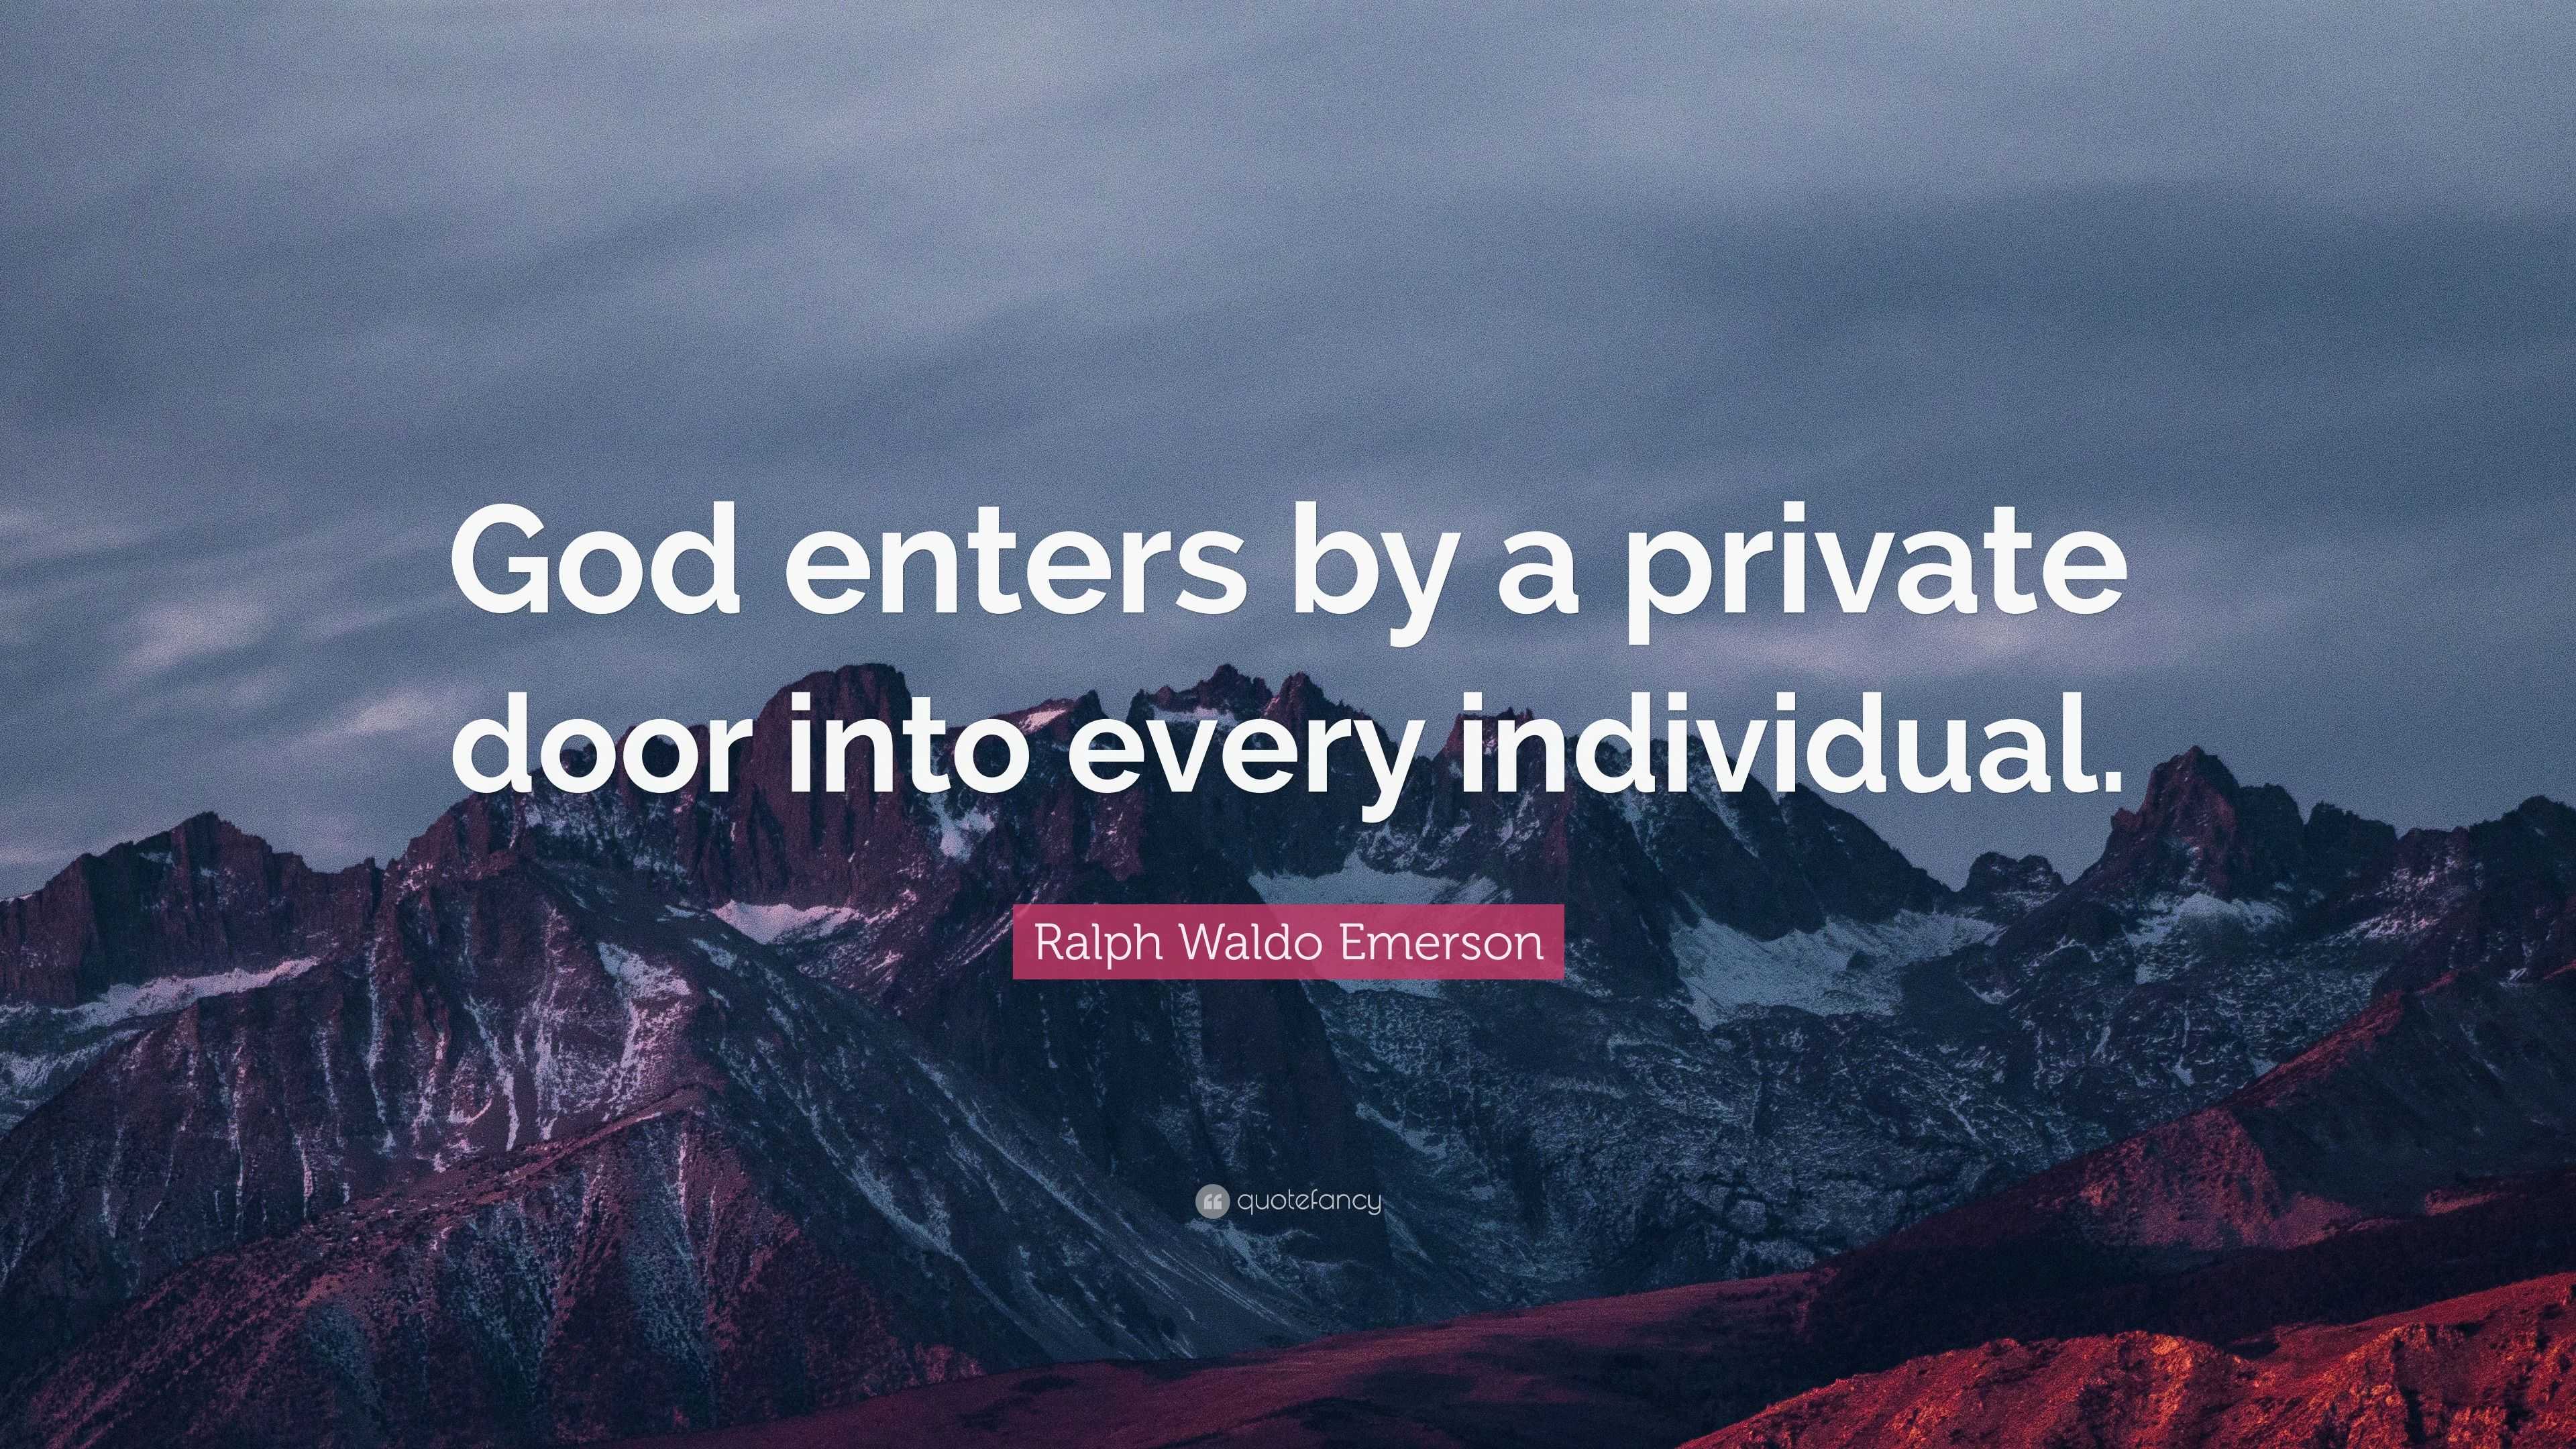 https://quotefancy.com/media/wallpaper/3840x2160/2173404-Ralph-Waldo-Emerson-Quote-God-enters-by-a-private-door-into-every.jpg